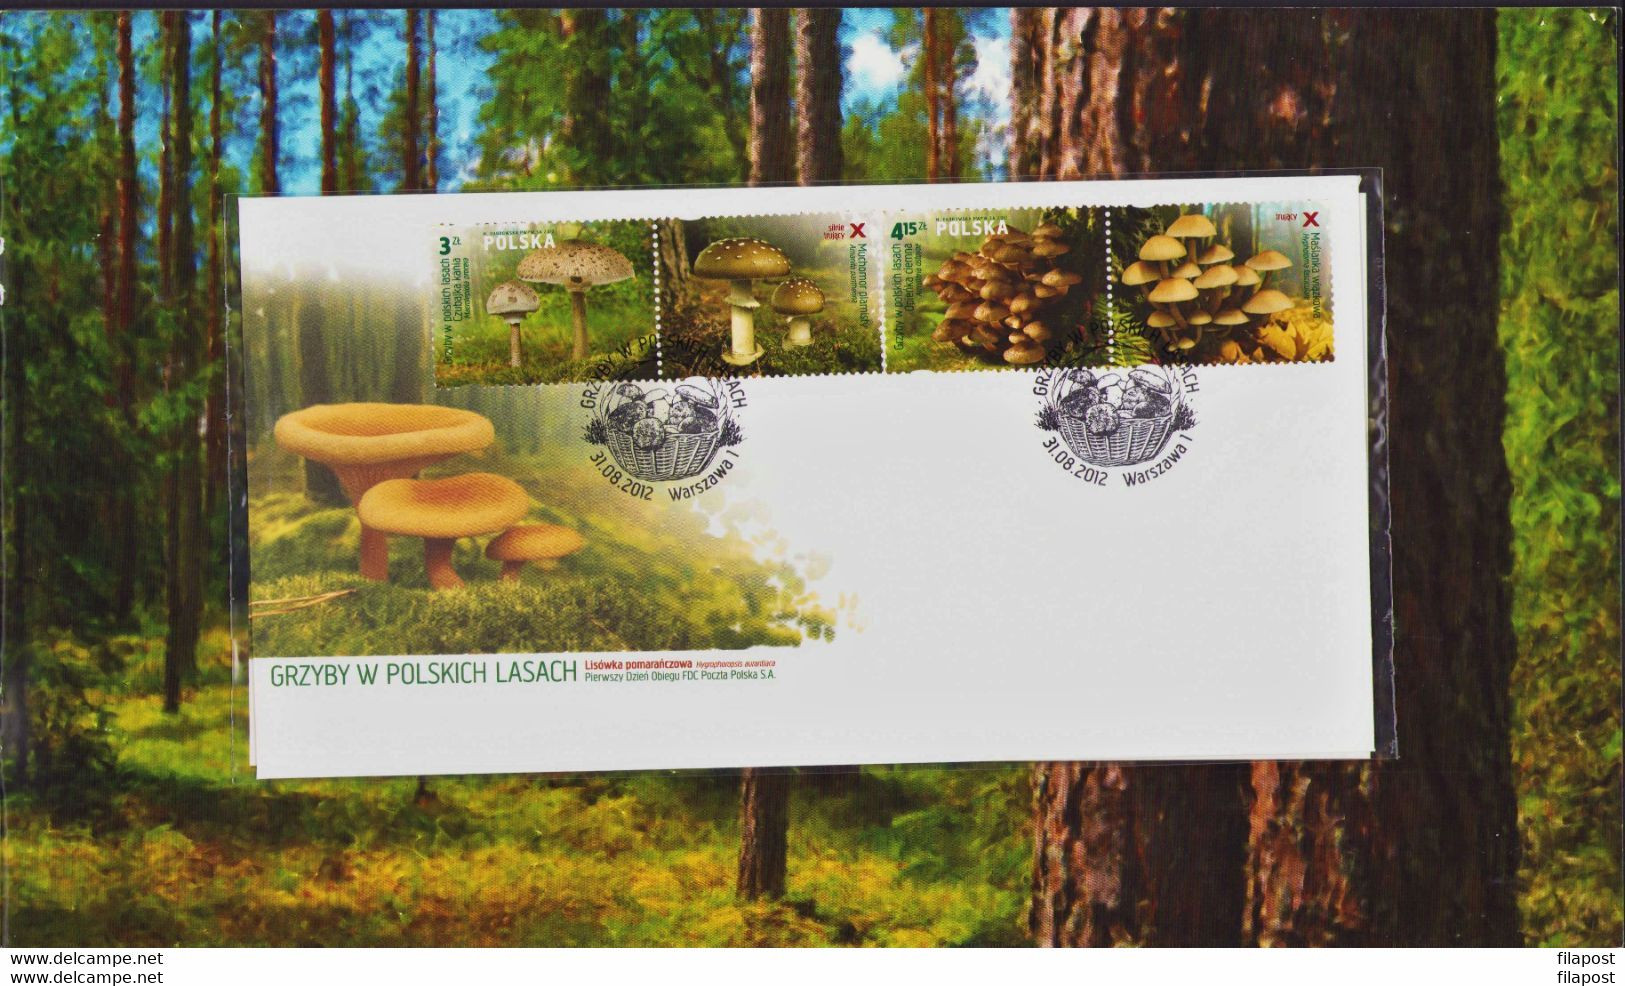 POLAND 2012 Booklet / Edible And Poisonous Mushrooms In Polish Forests / Full Sheet MNH** + 2 X FDC FV - Postzegelboekjes